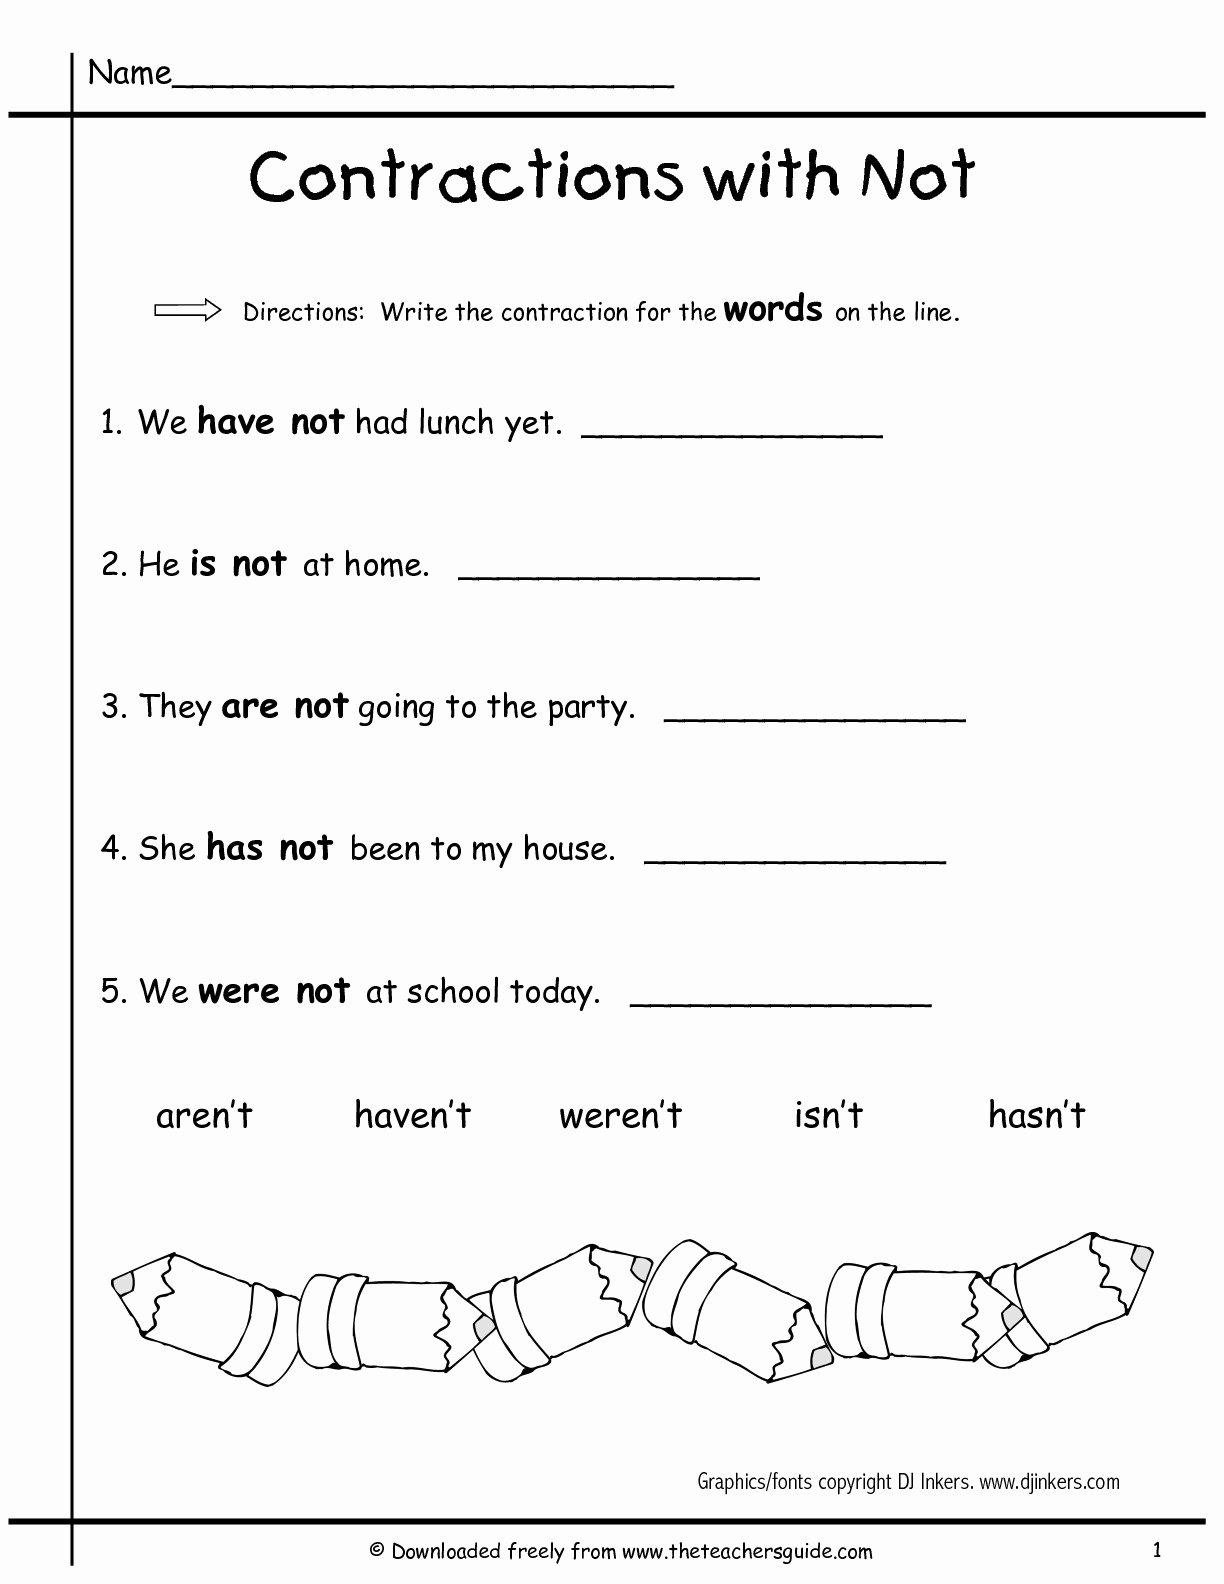 Contractions Worksheet 2nd Grade Beautiful 38 Contractions Worksheets for Improving Your Grammar